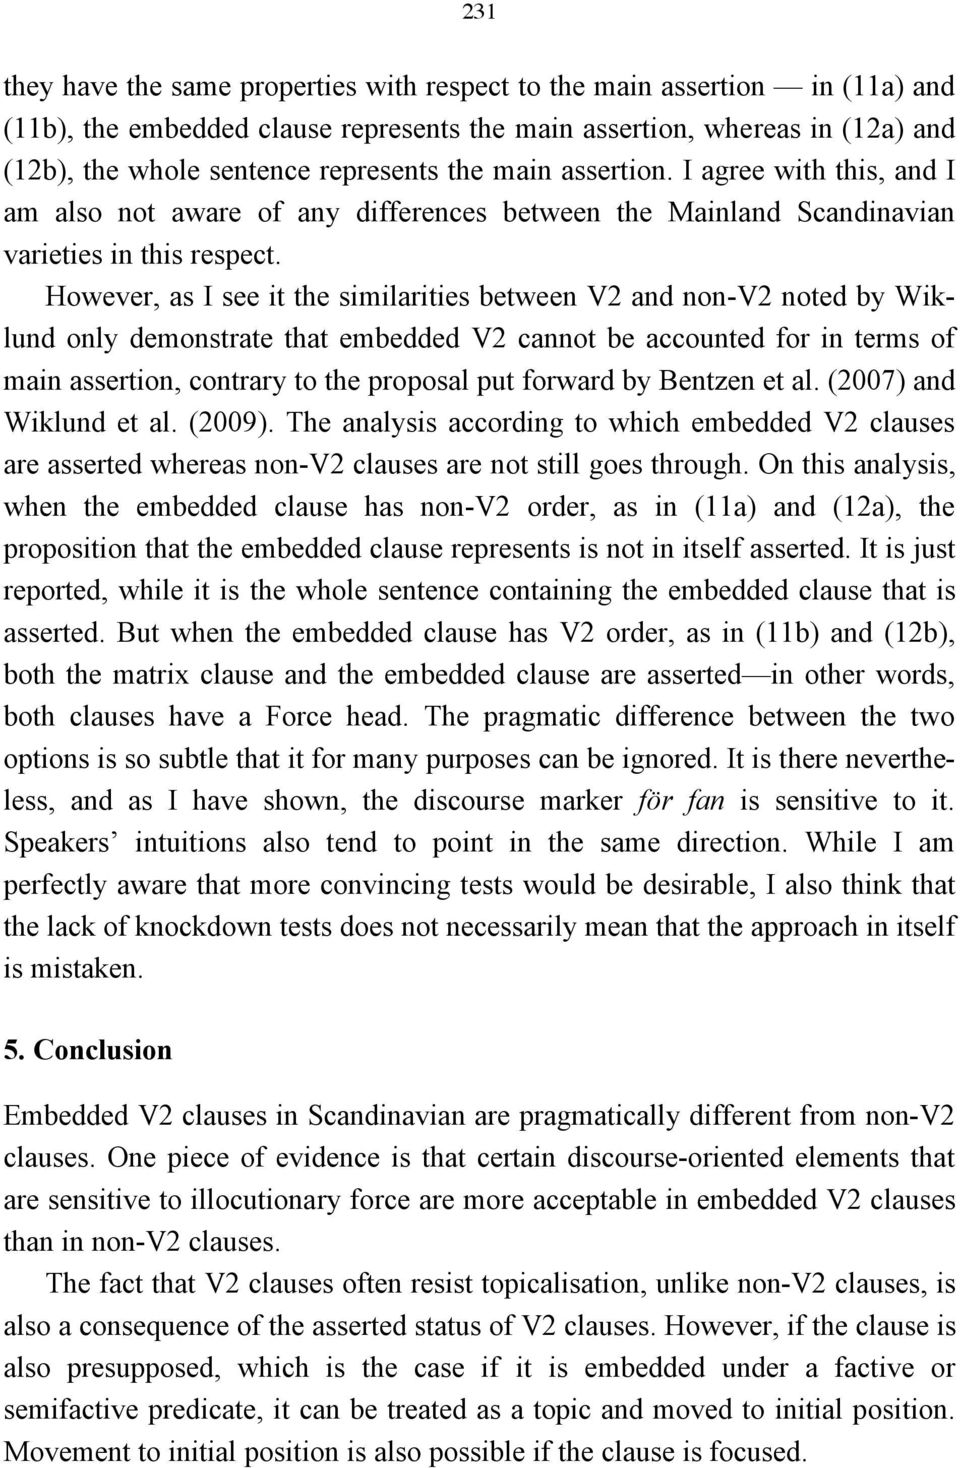 However, as I see it the similarities between V2 and non-v2 noted by Wiklund only demonstrate that embedded V2 cannot be accounted for in terms of main assertion, contrary to the proposal put forward